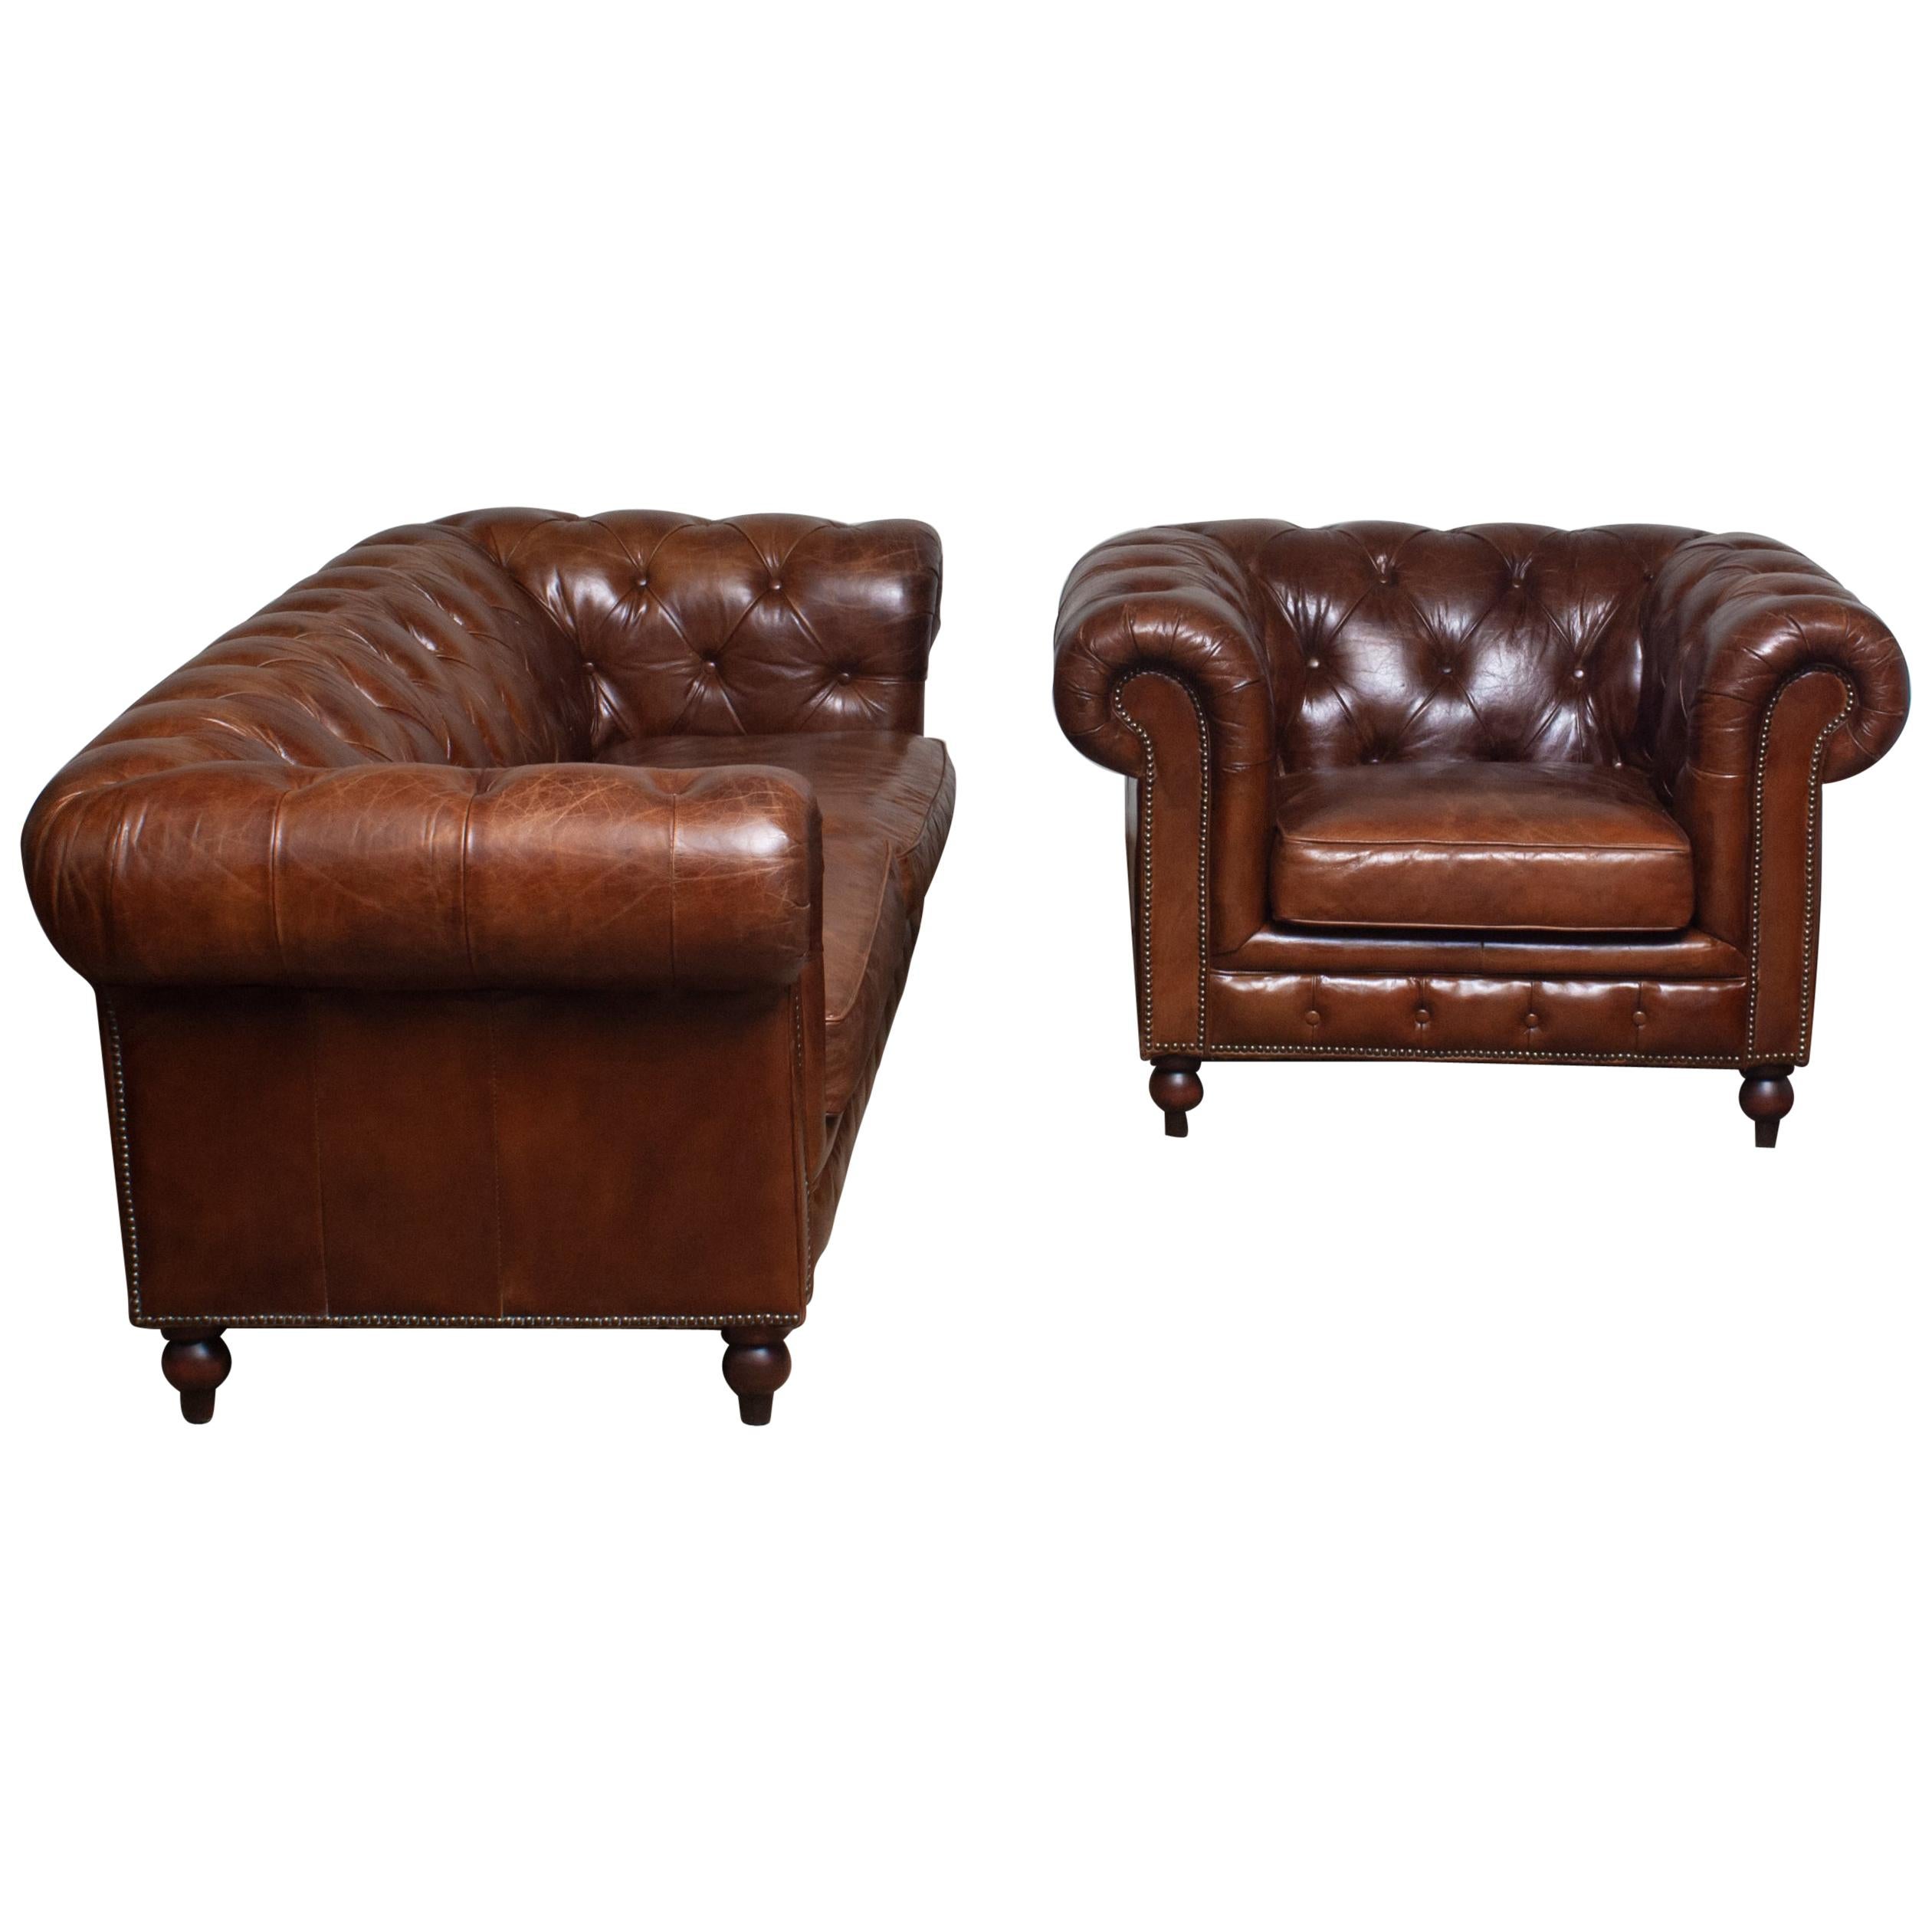 Tufted Brown Leather Chesterfield Sofa and Arm / Lounge Chair